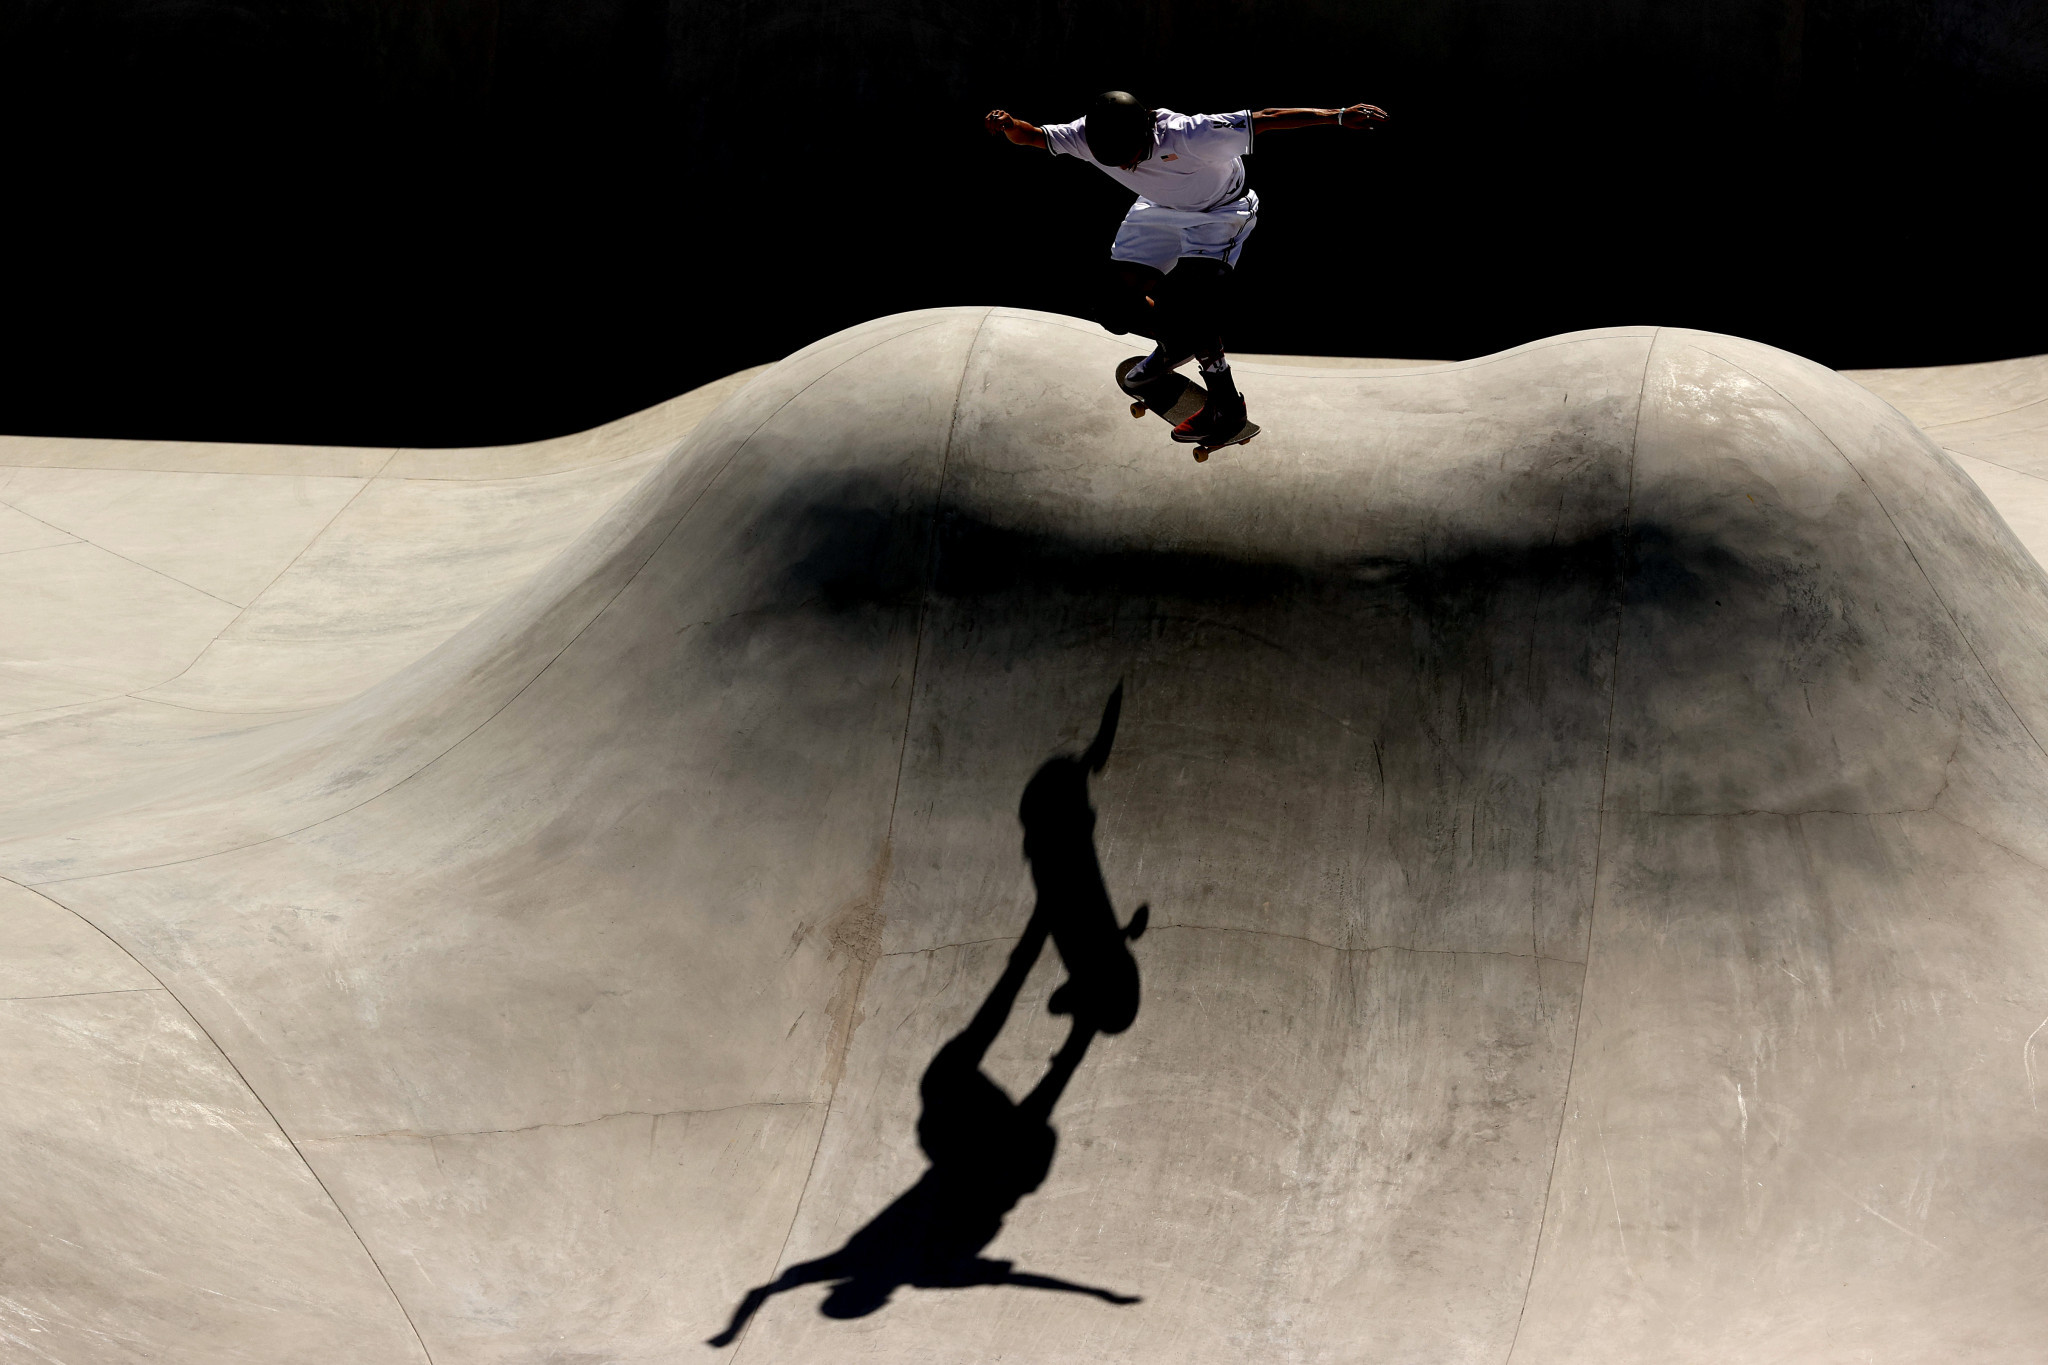 World Skate has cancelled the Street and Park Skateboarding World Championships which were scheduled to be held in Brazil ©Getty Images